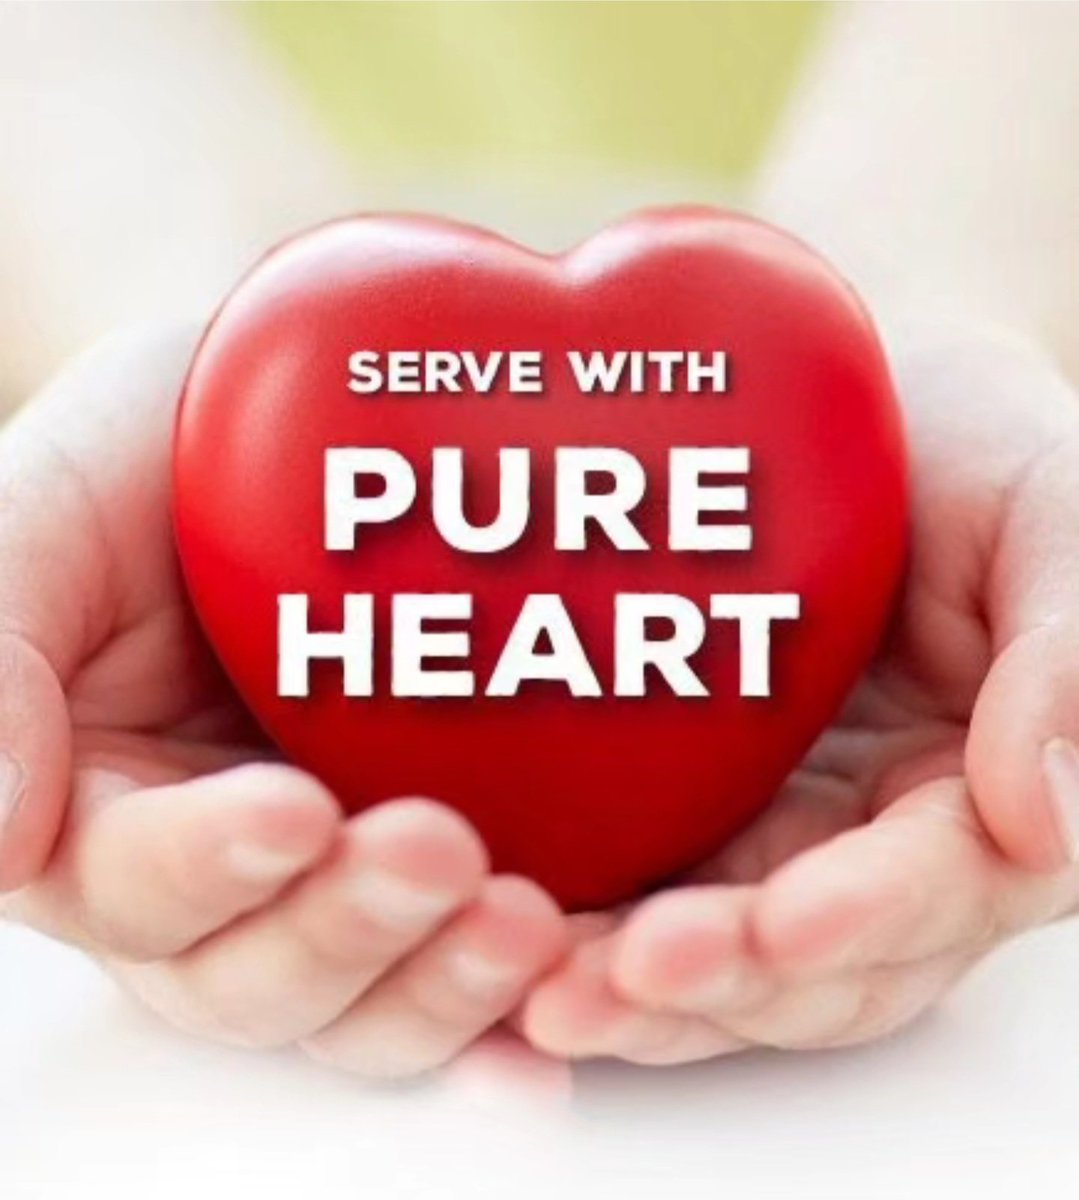 Good morning! Our hearts and our deeds must be pure. Purity of heart is a requirement. Only the pure in heart shall see GOD! #pureheart #helpinthehouse #Solutionist #iamaningredient #JusticeGeneral